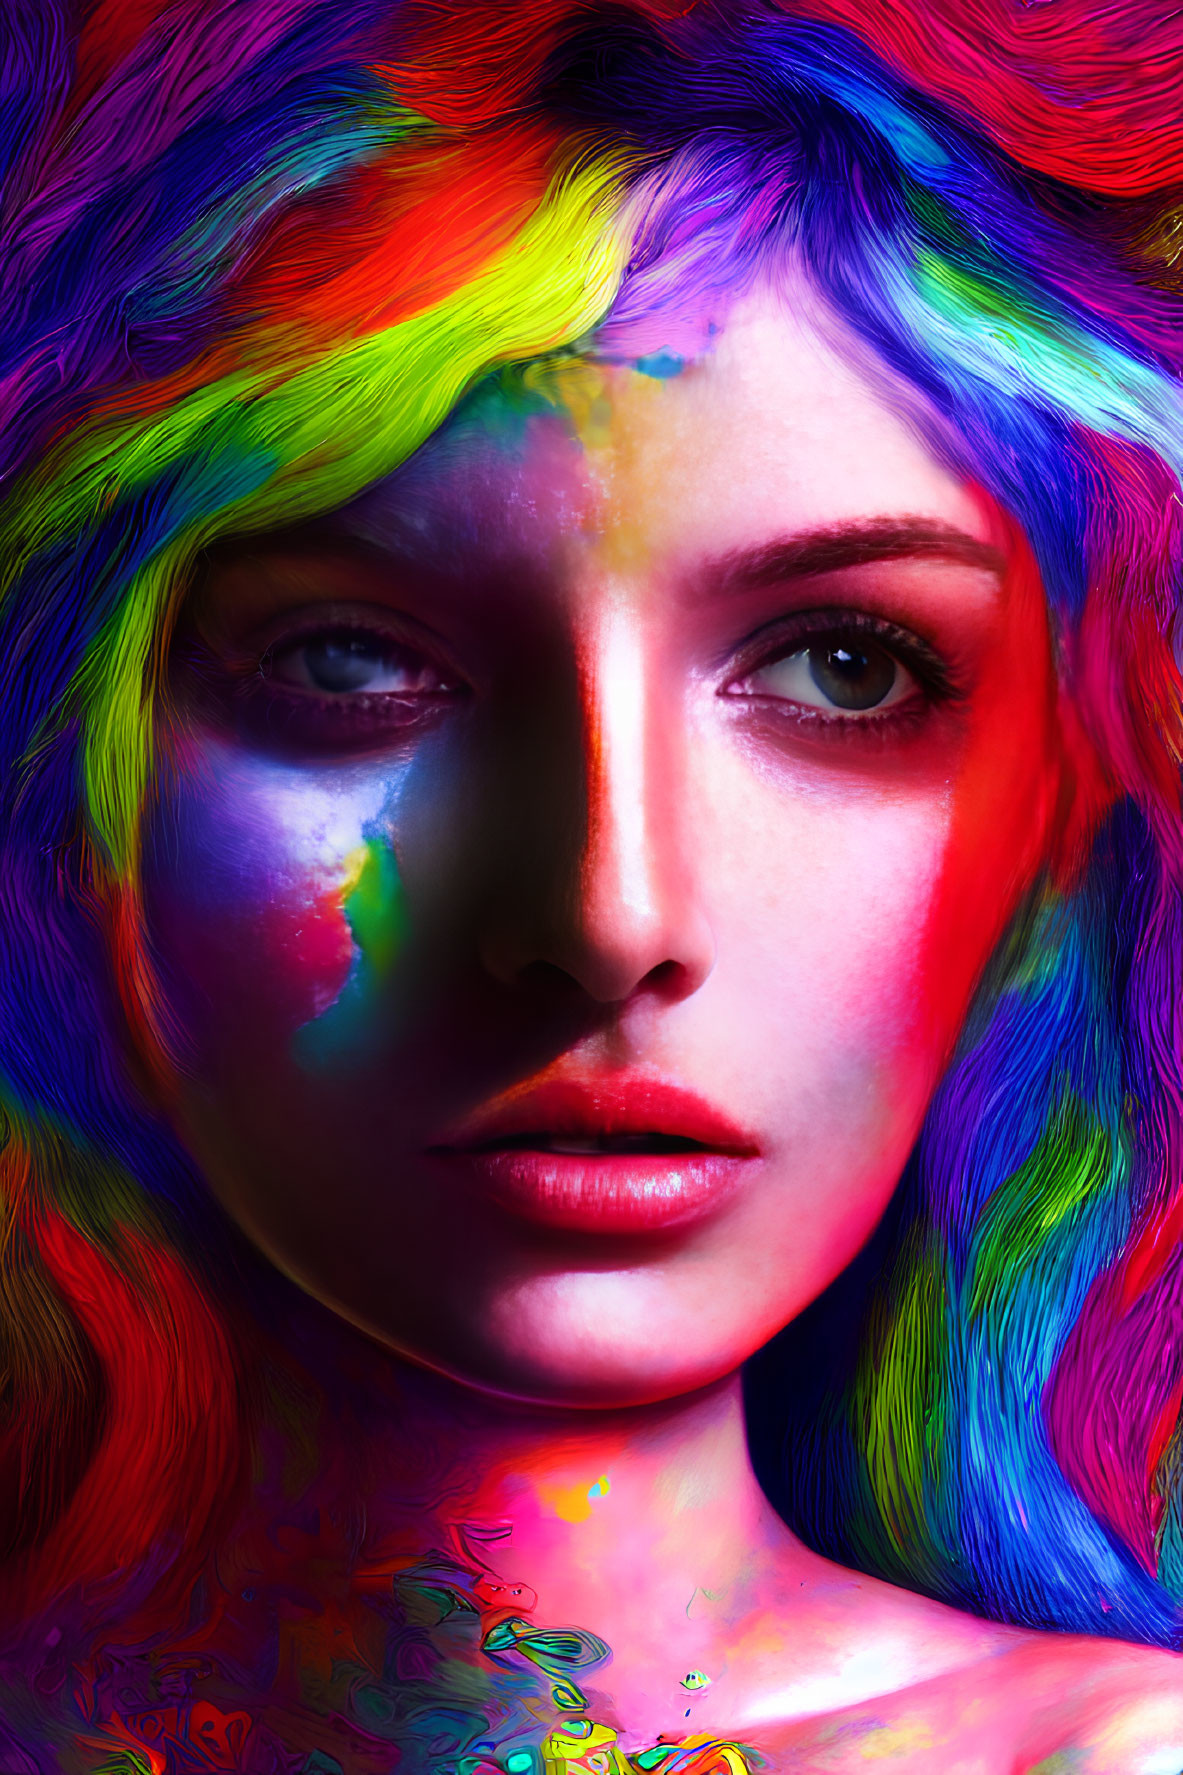 Colorful portrait of a woman with paint-covered hair and face